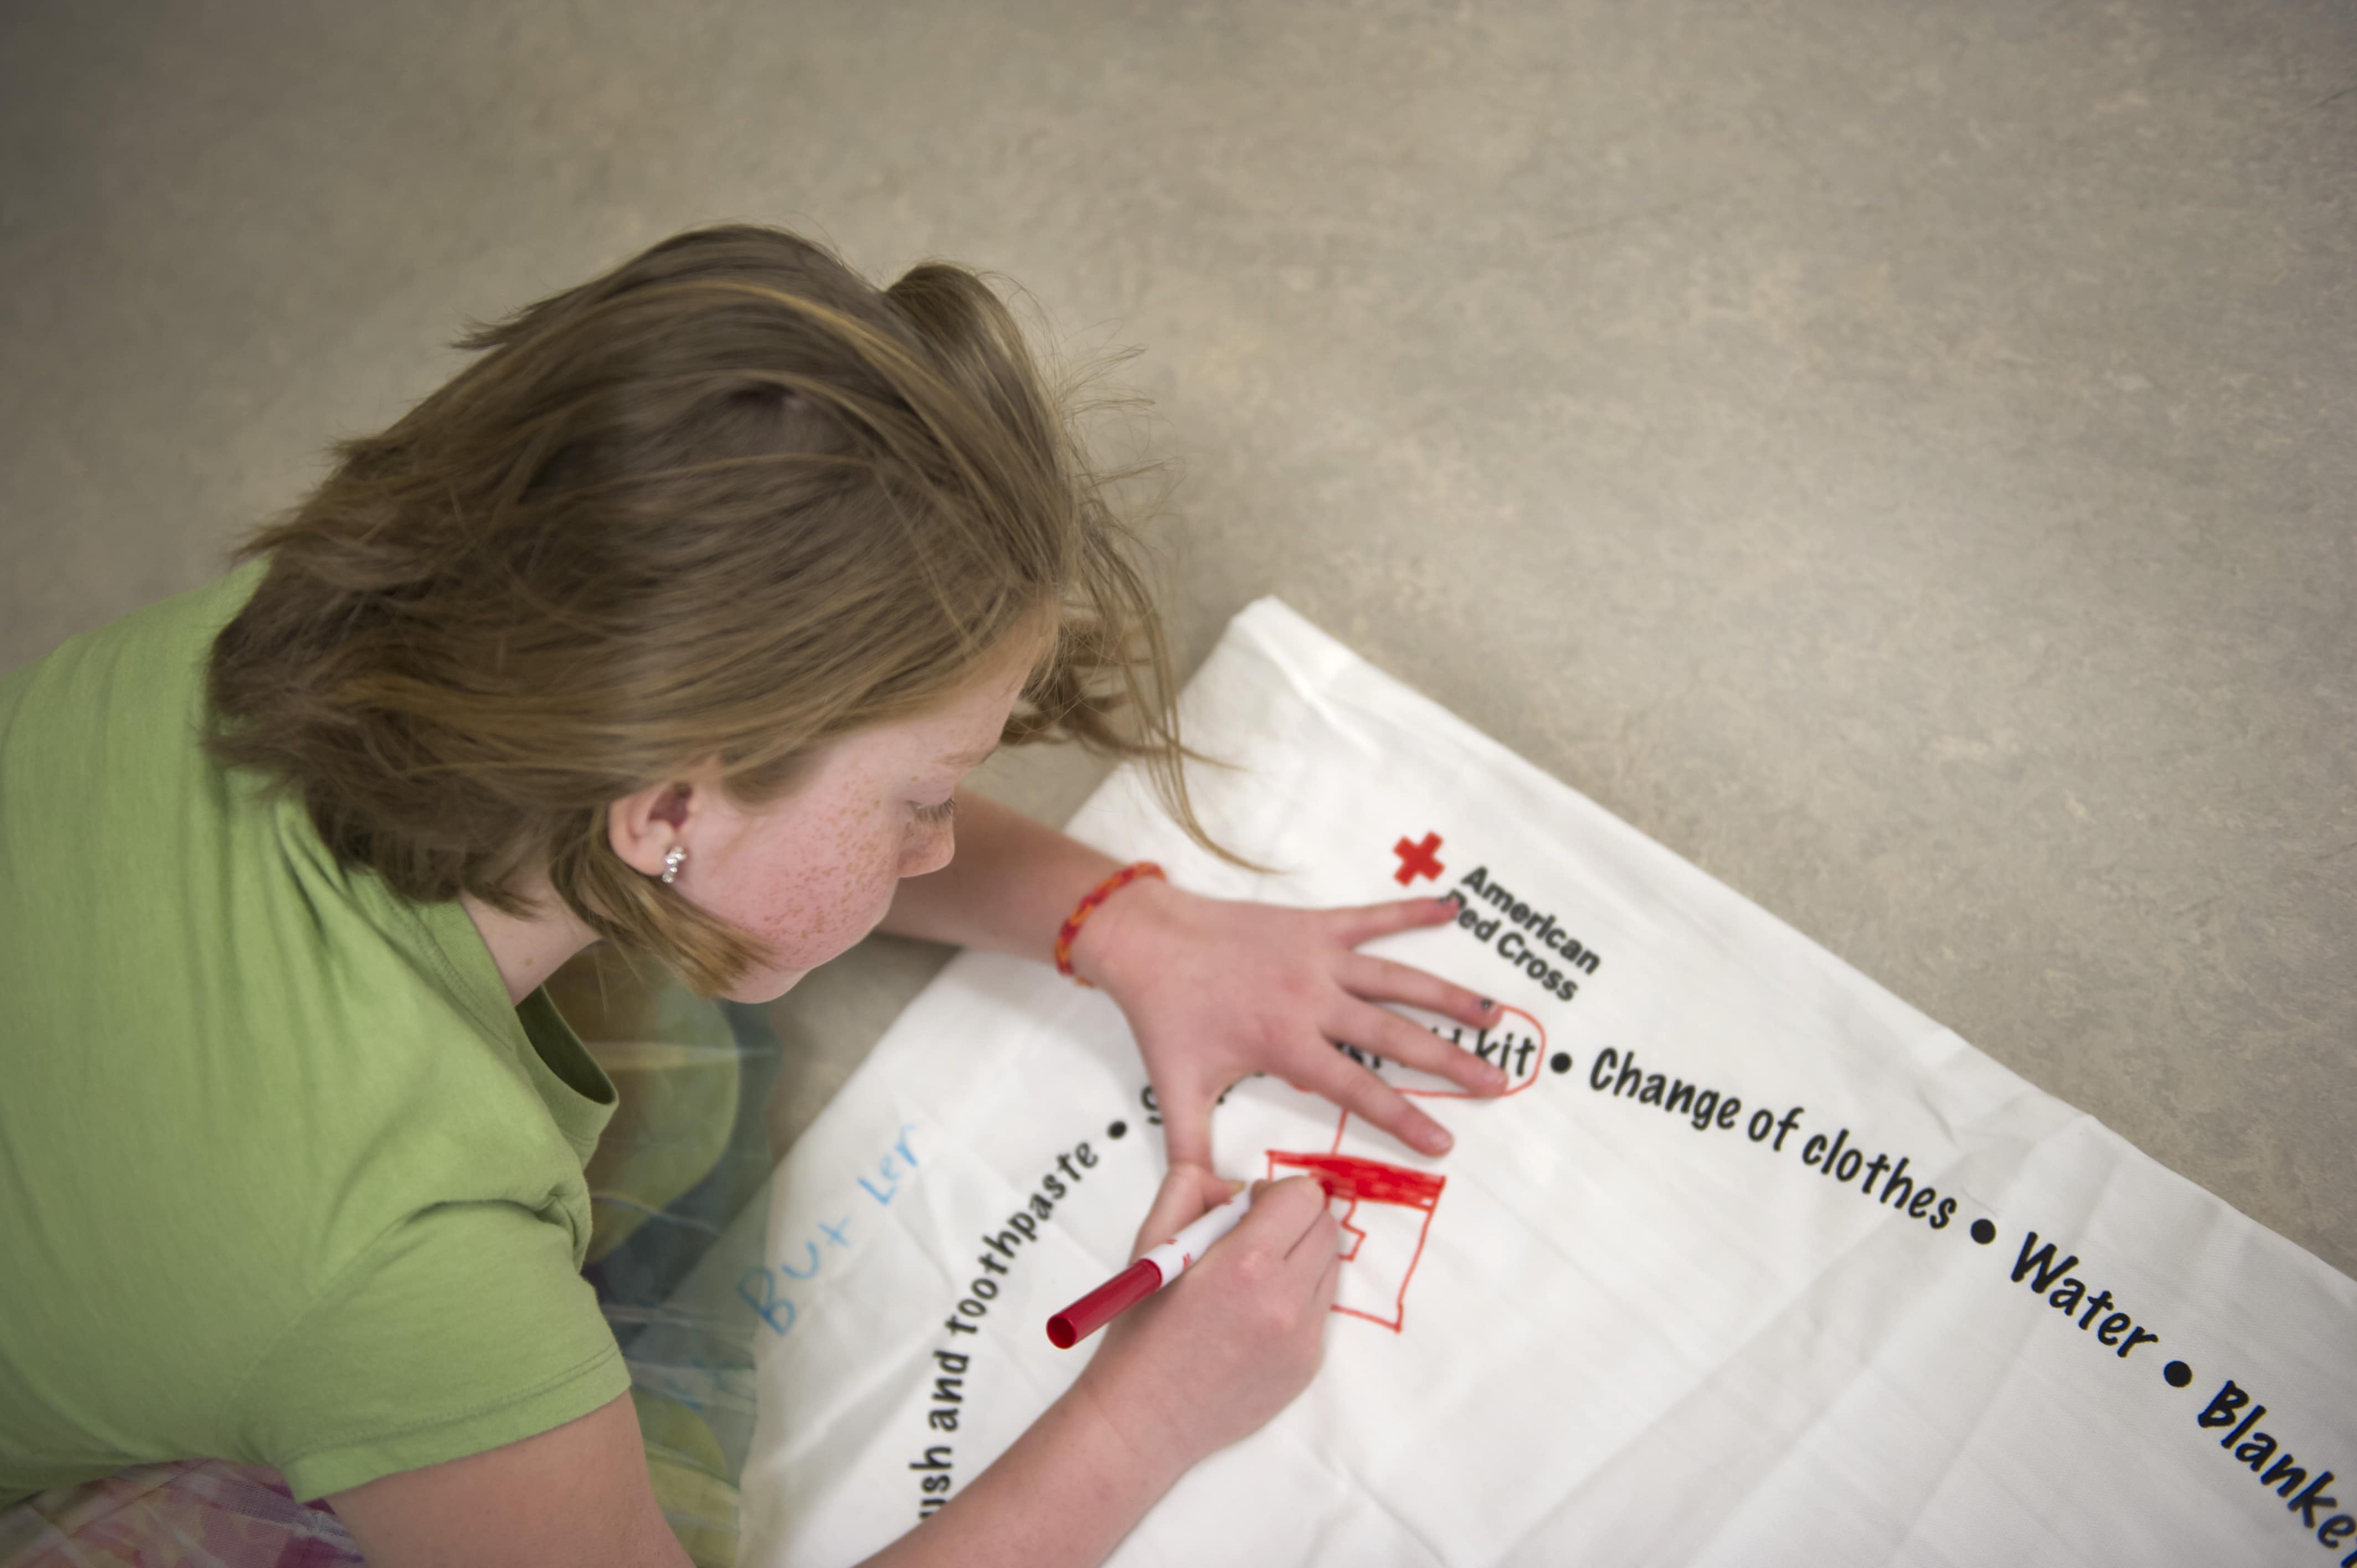 A student personalizes her pillowcase given by the Red Cross to store her emergency supplies in preparation for future weather emergencies during the Pillowcase Project event at her school. 